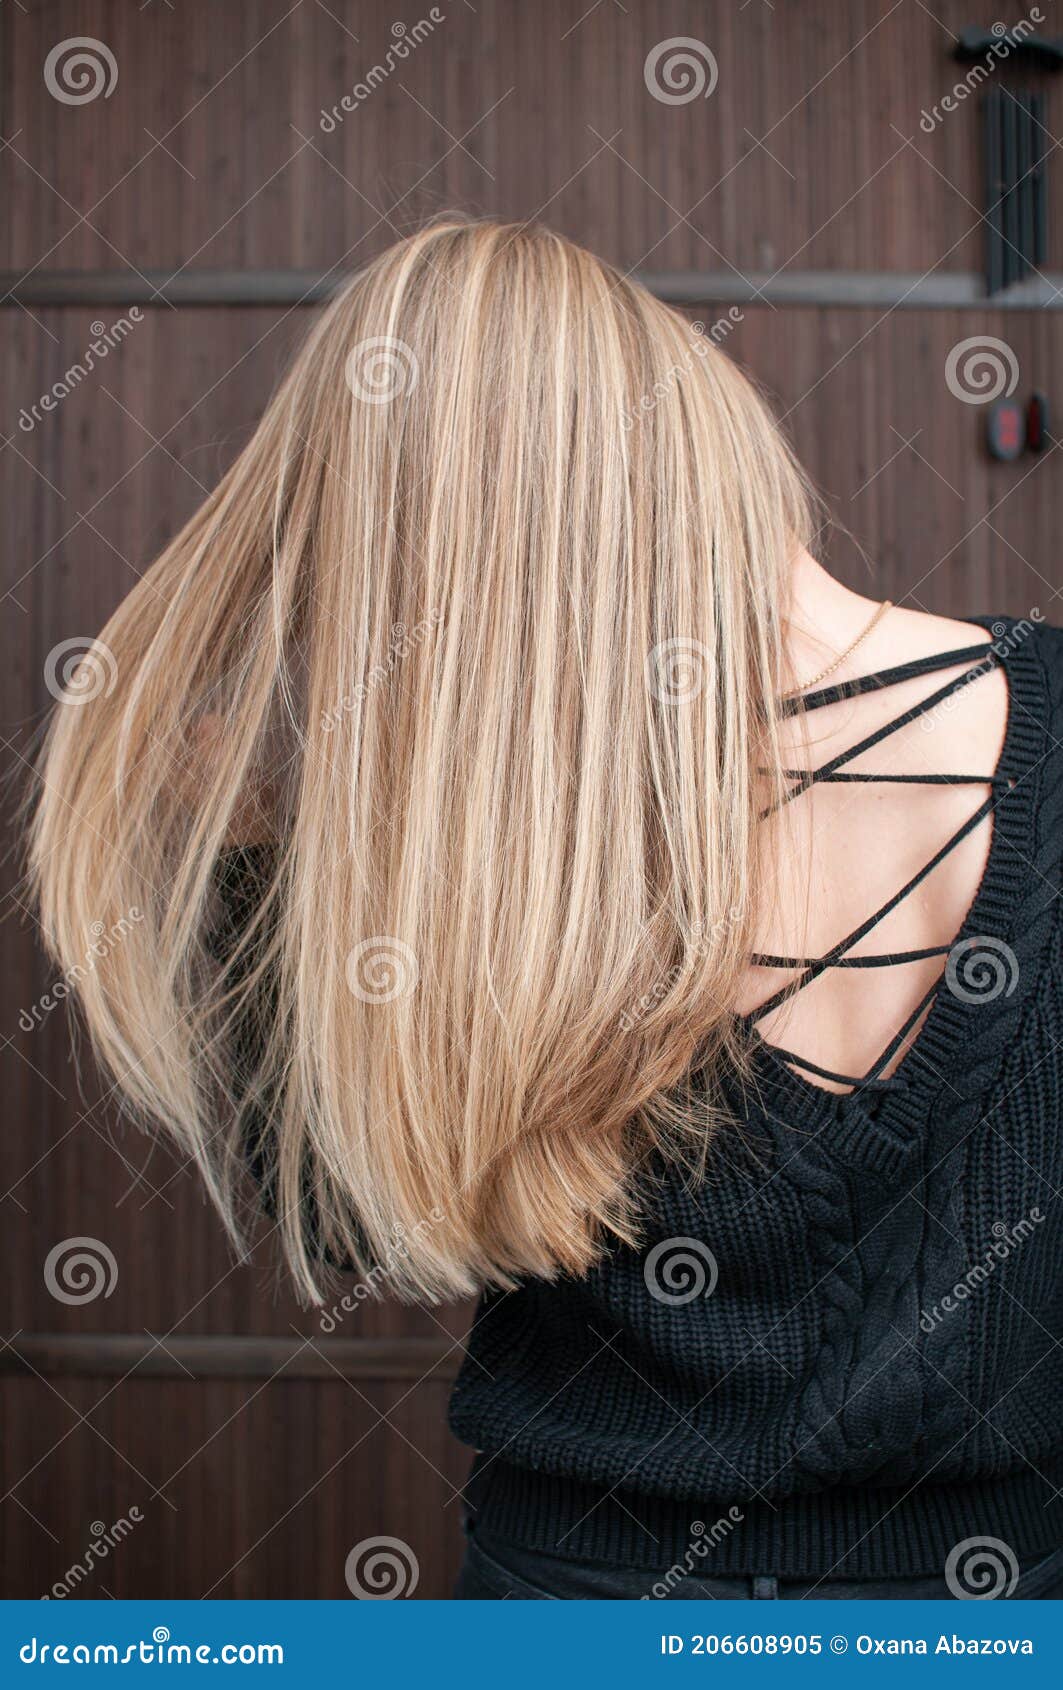 Back View of Blonde Hair with Highlights on Young Woman Stock Image - Image  of beautiful, blonde: 206608905